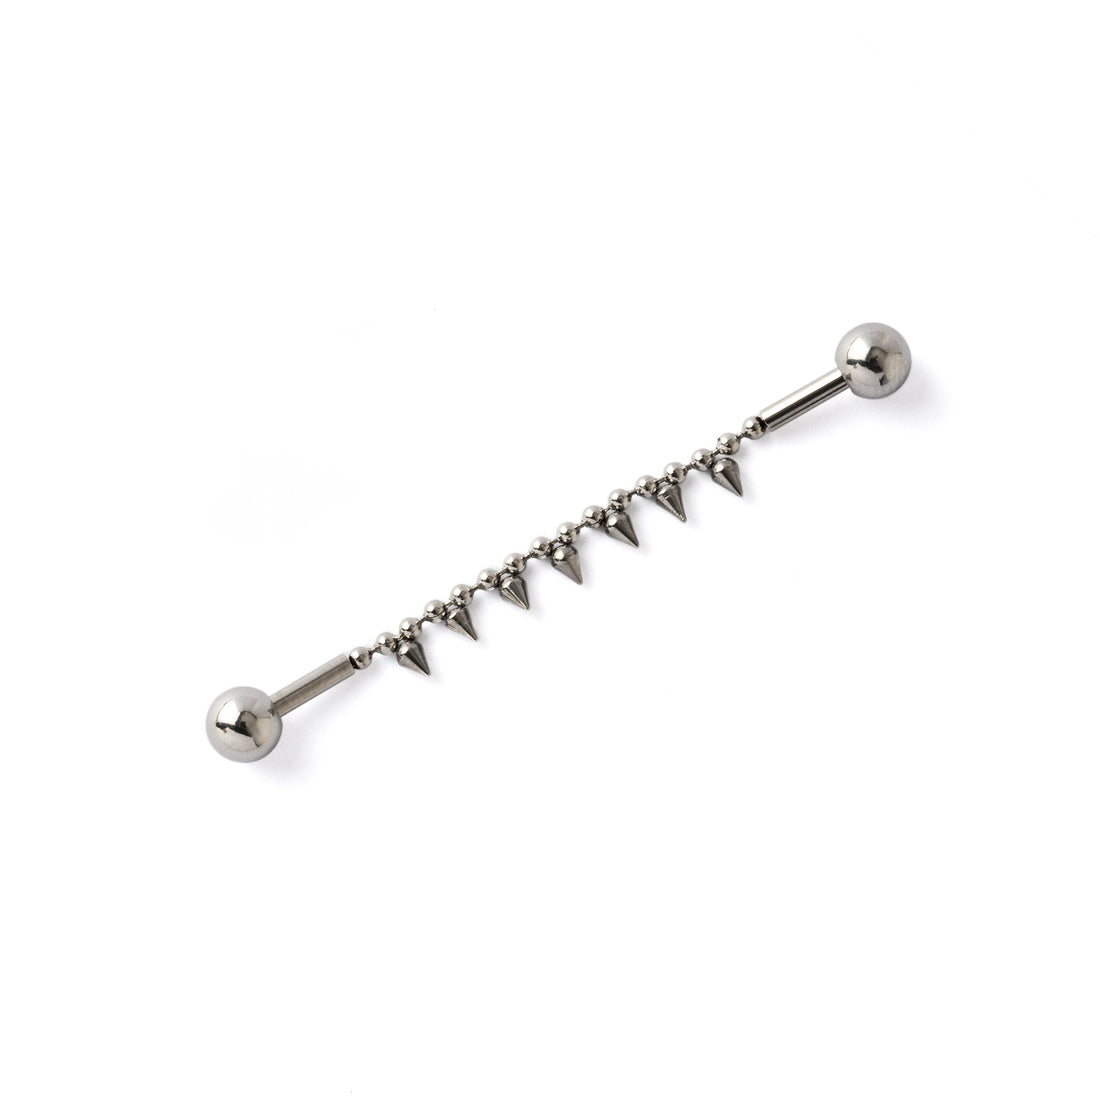 Spikes Industrial Barbell frontal view